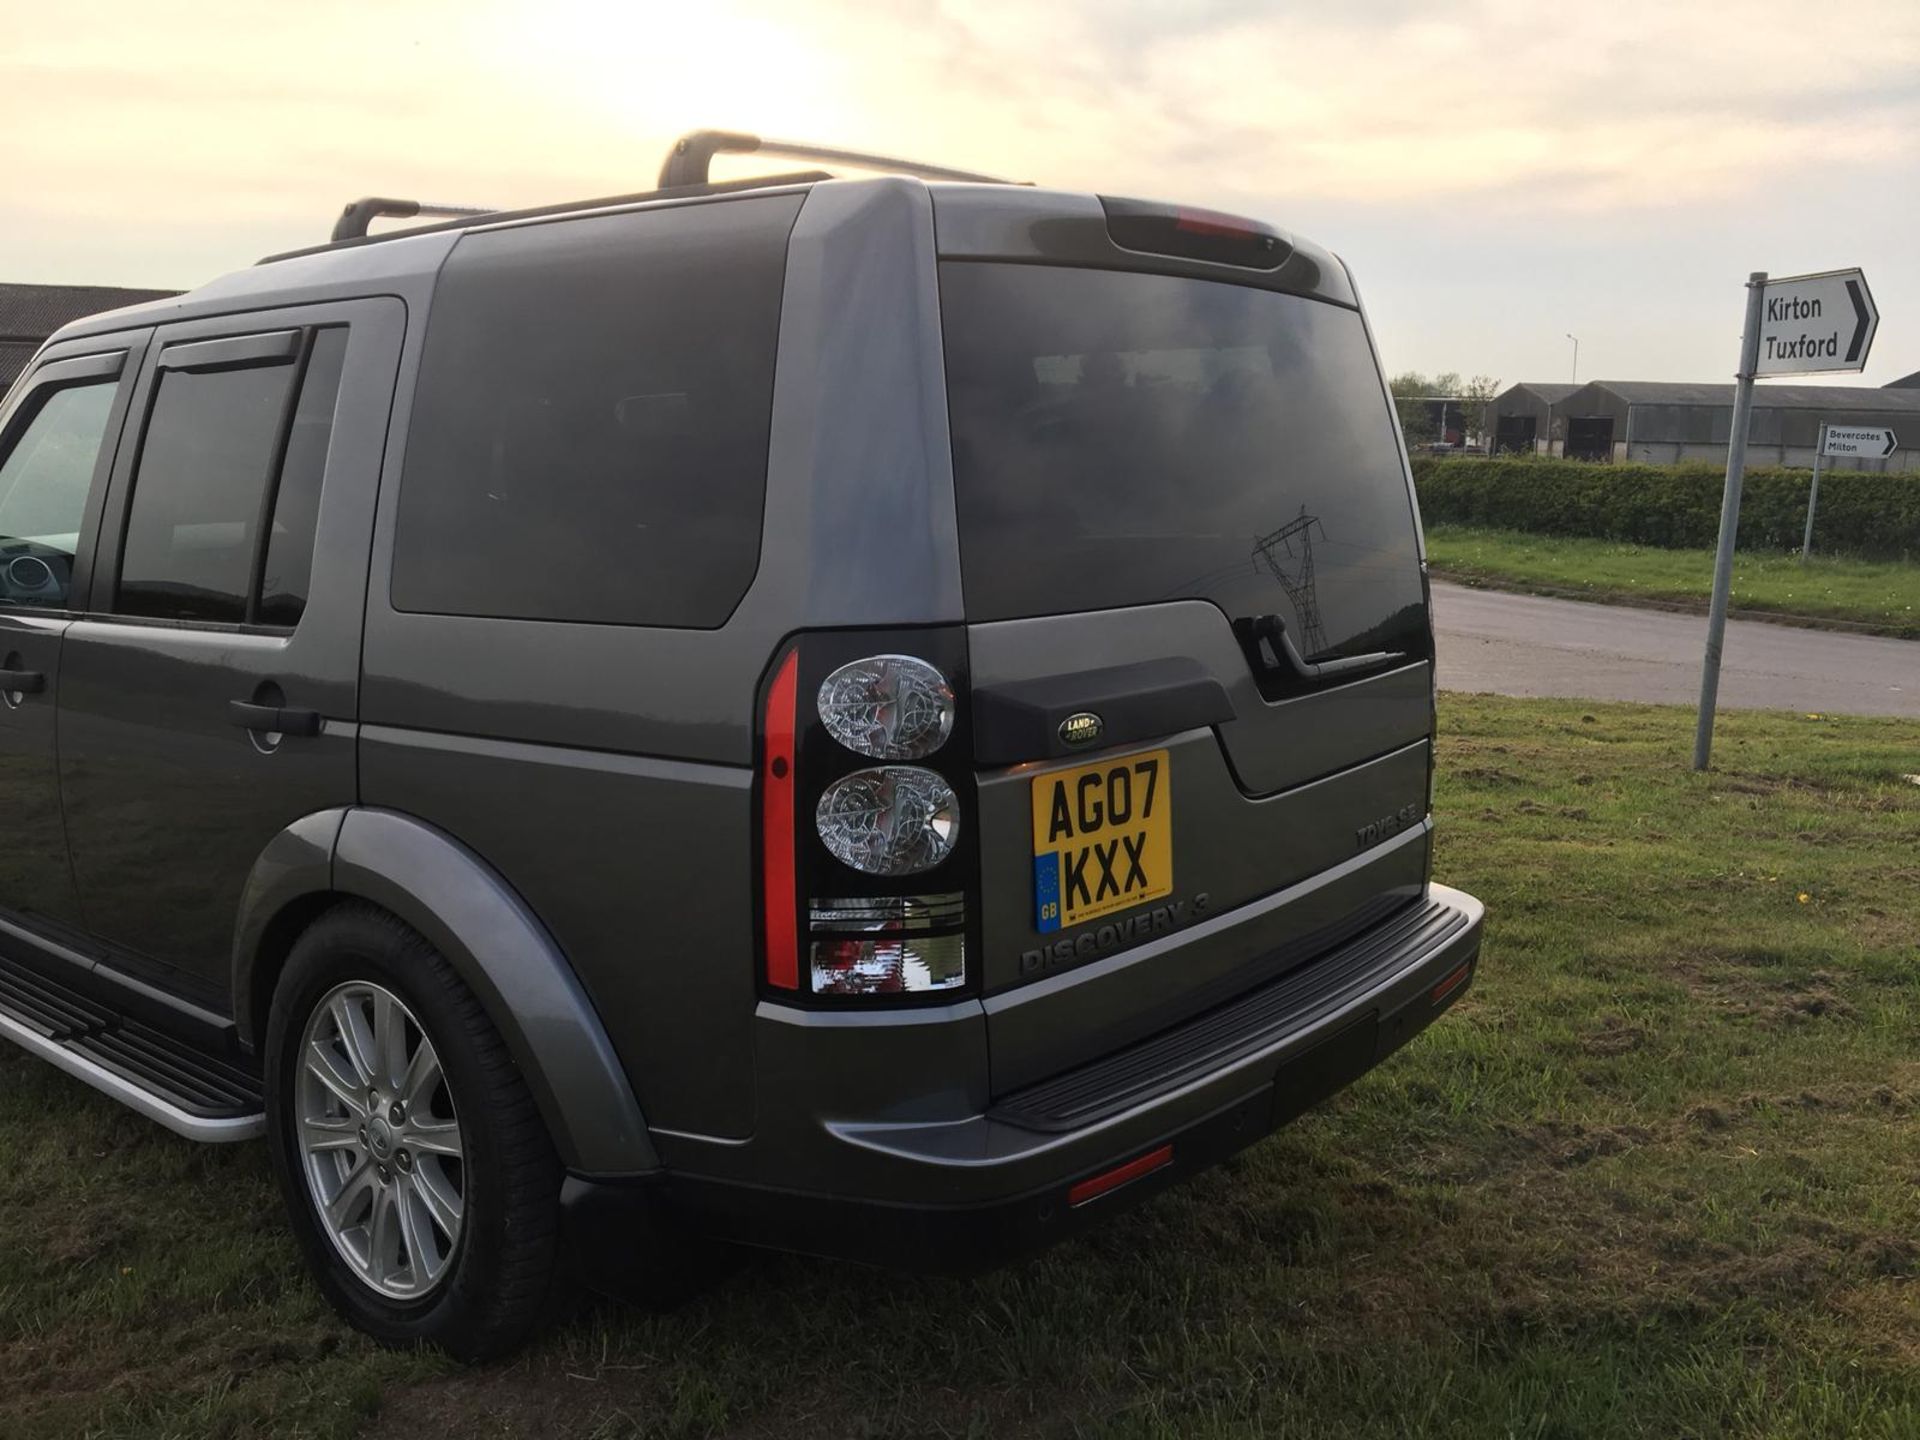 2007/07 REG LAND ROVER DISCOVERY 3 TDV6 SE AUTOMATIC 2.7 DIESEL 4X4, 7 SEAT FACELIFT LIGHTS *NO VAT* - Image 7 of 16